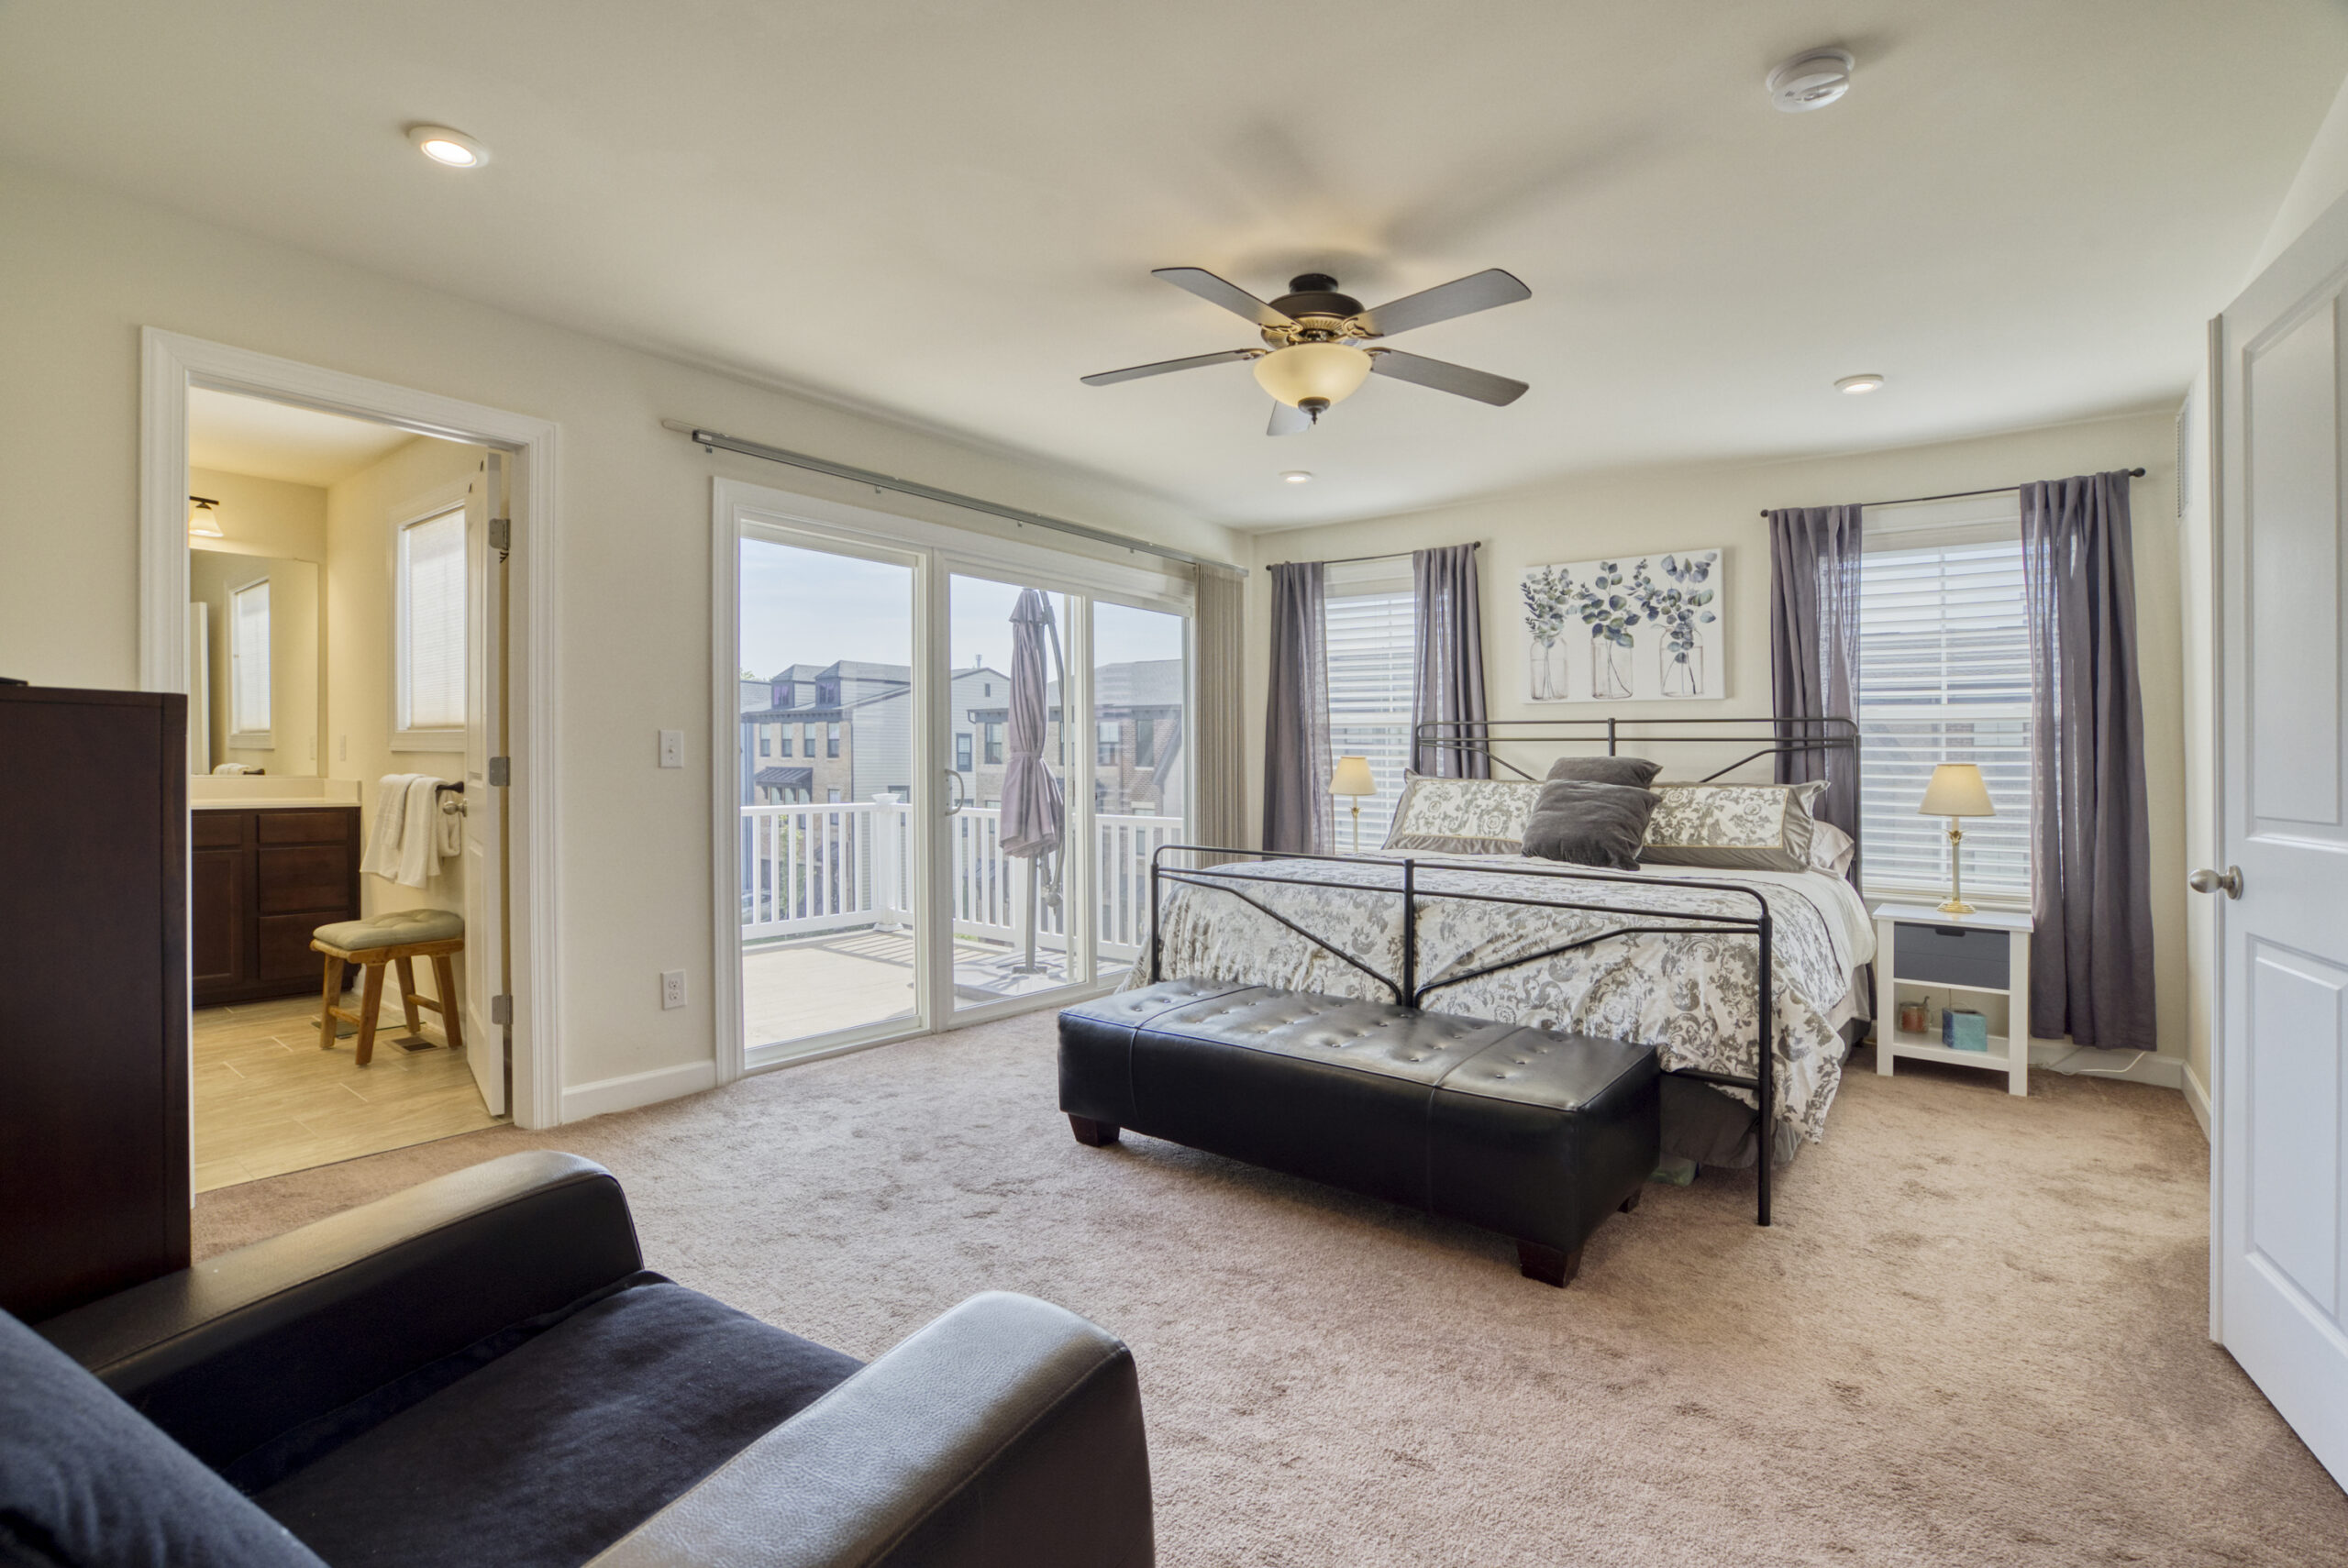 Professional interior photo of 8109 Zoe Place, Alexandria, VA - Showing the primary bedroom suite with sliding door to private balcony